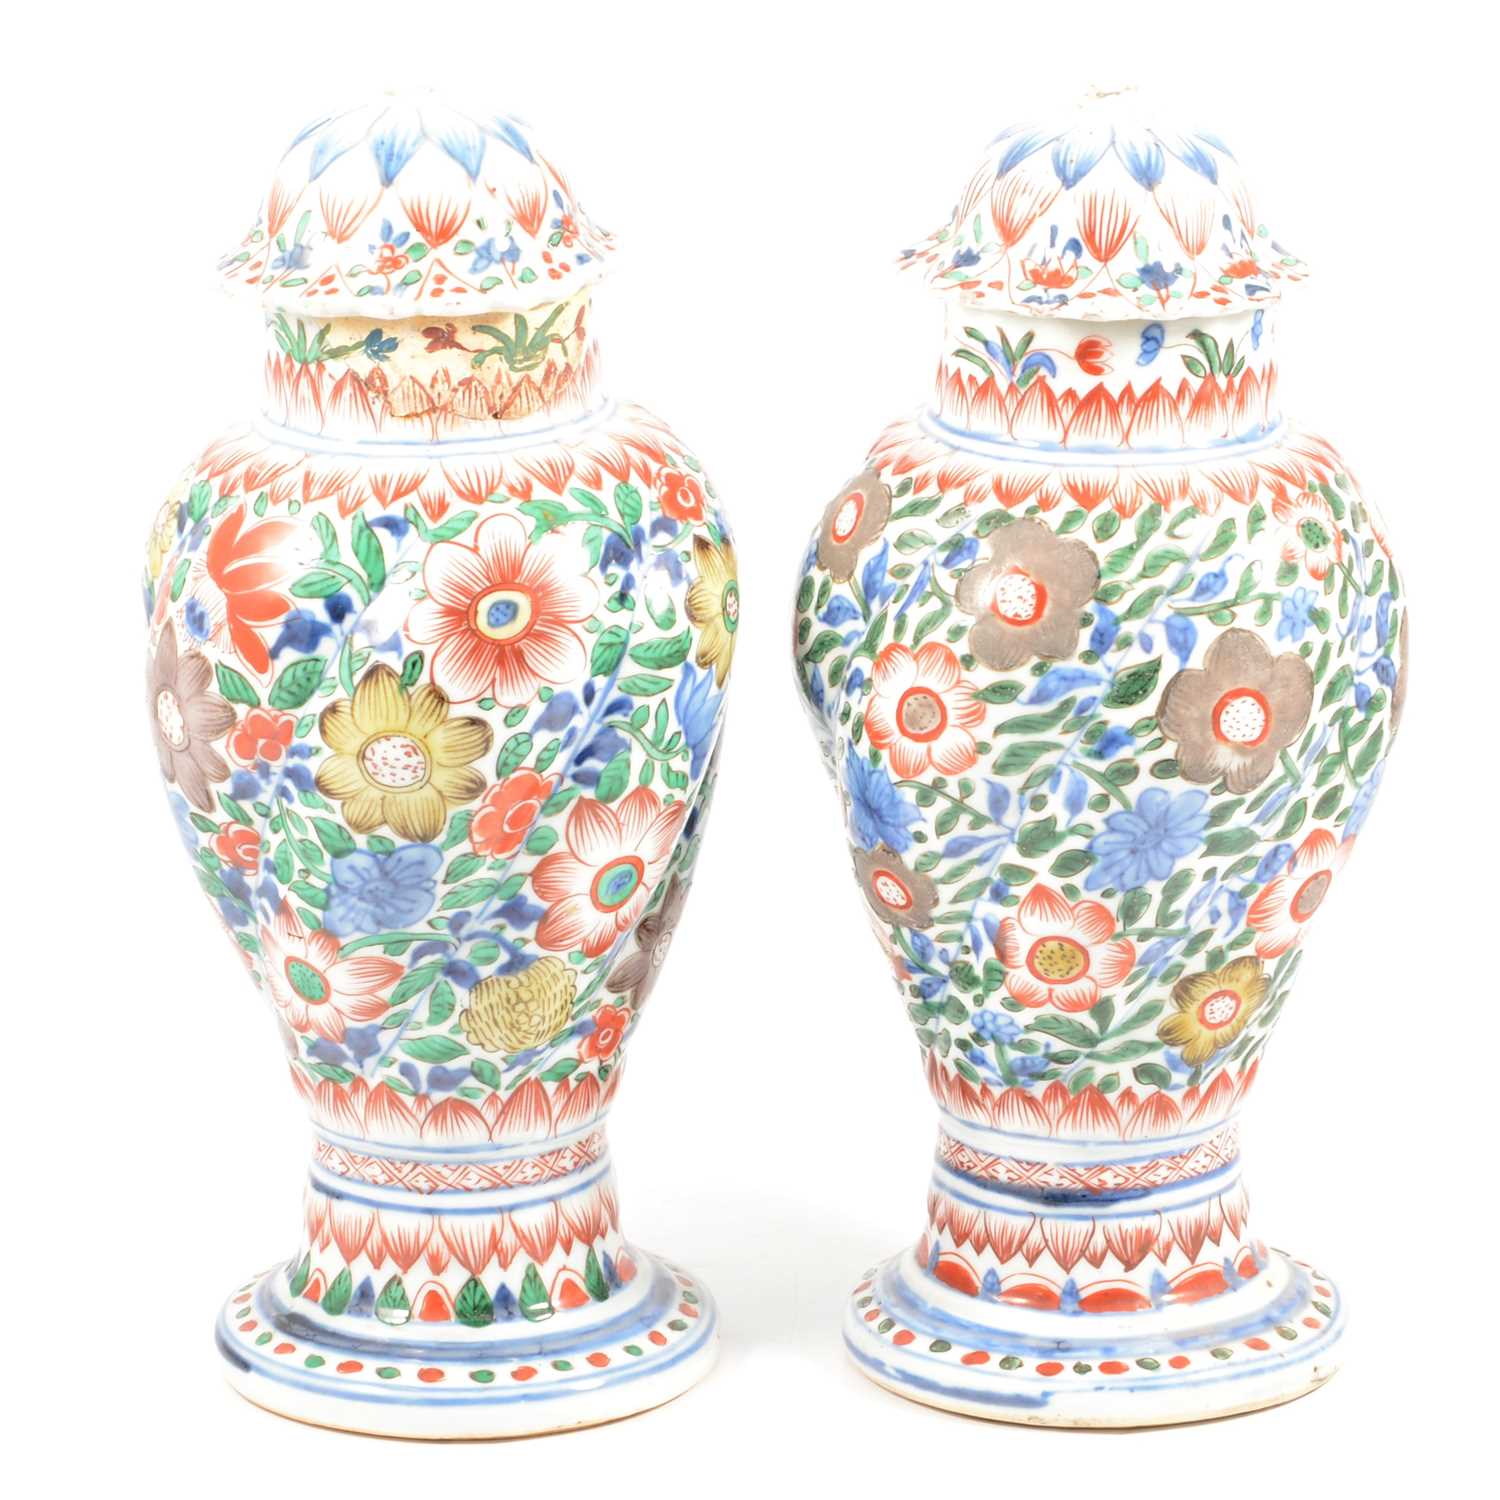 Pair of Chinese porcelain covered vases, clobbered decoration